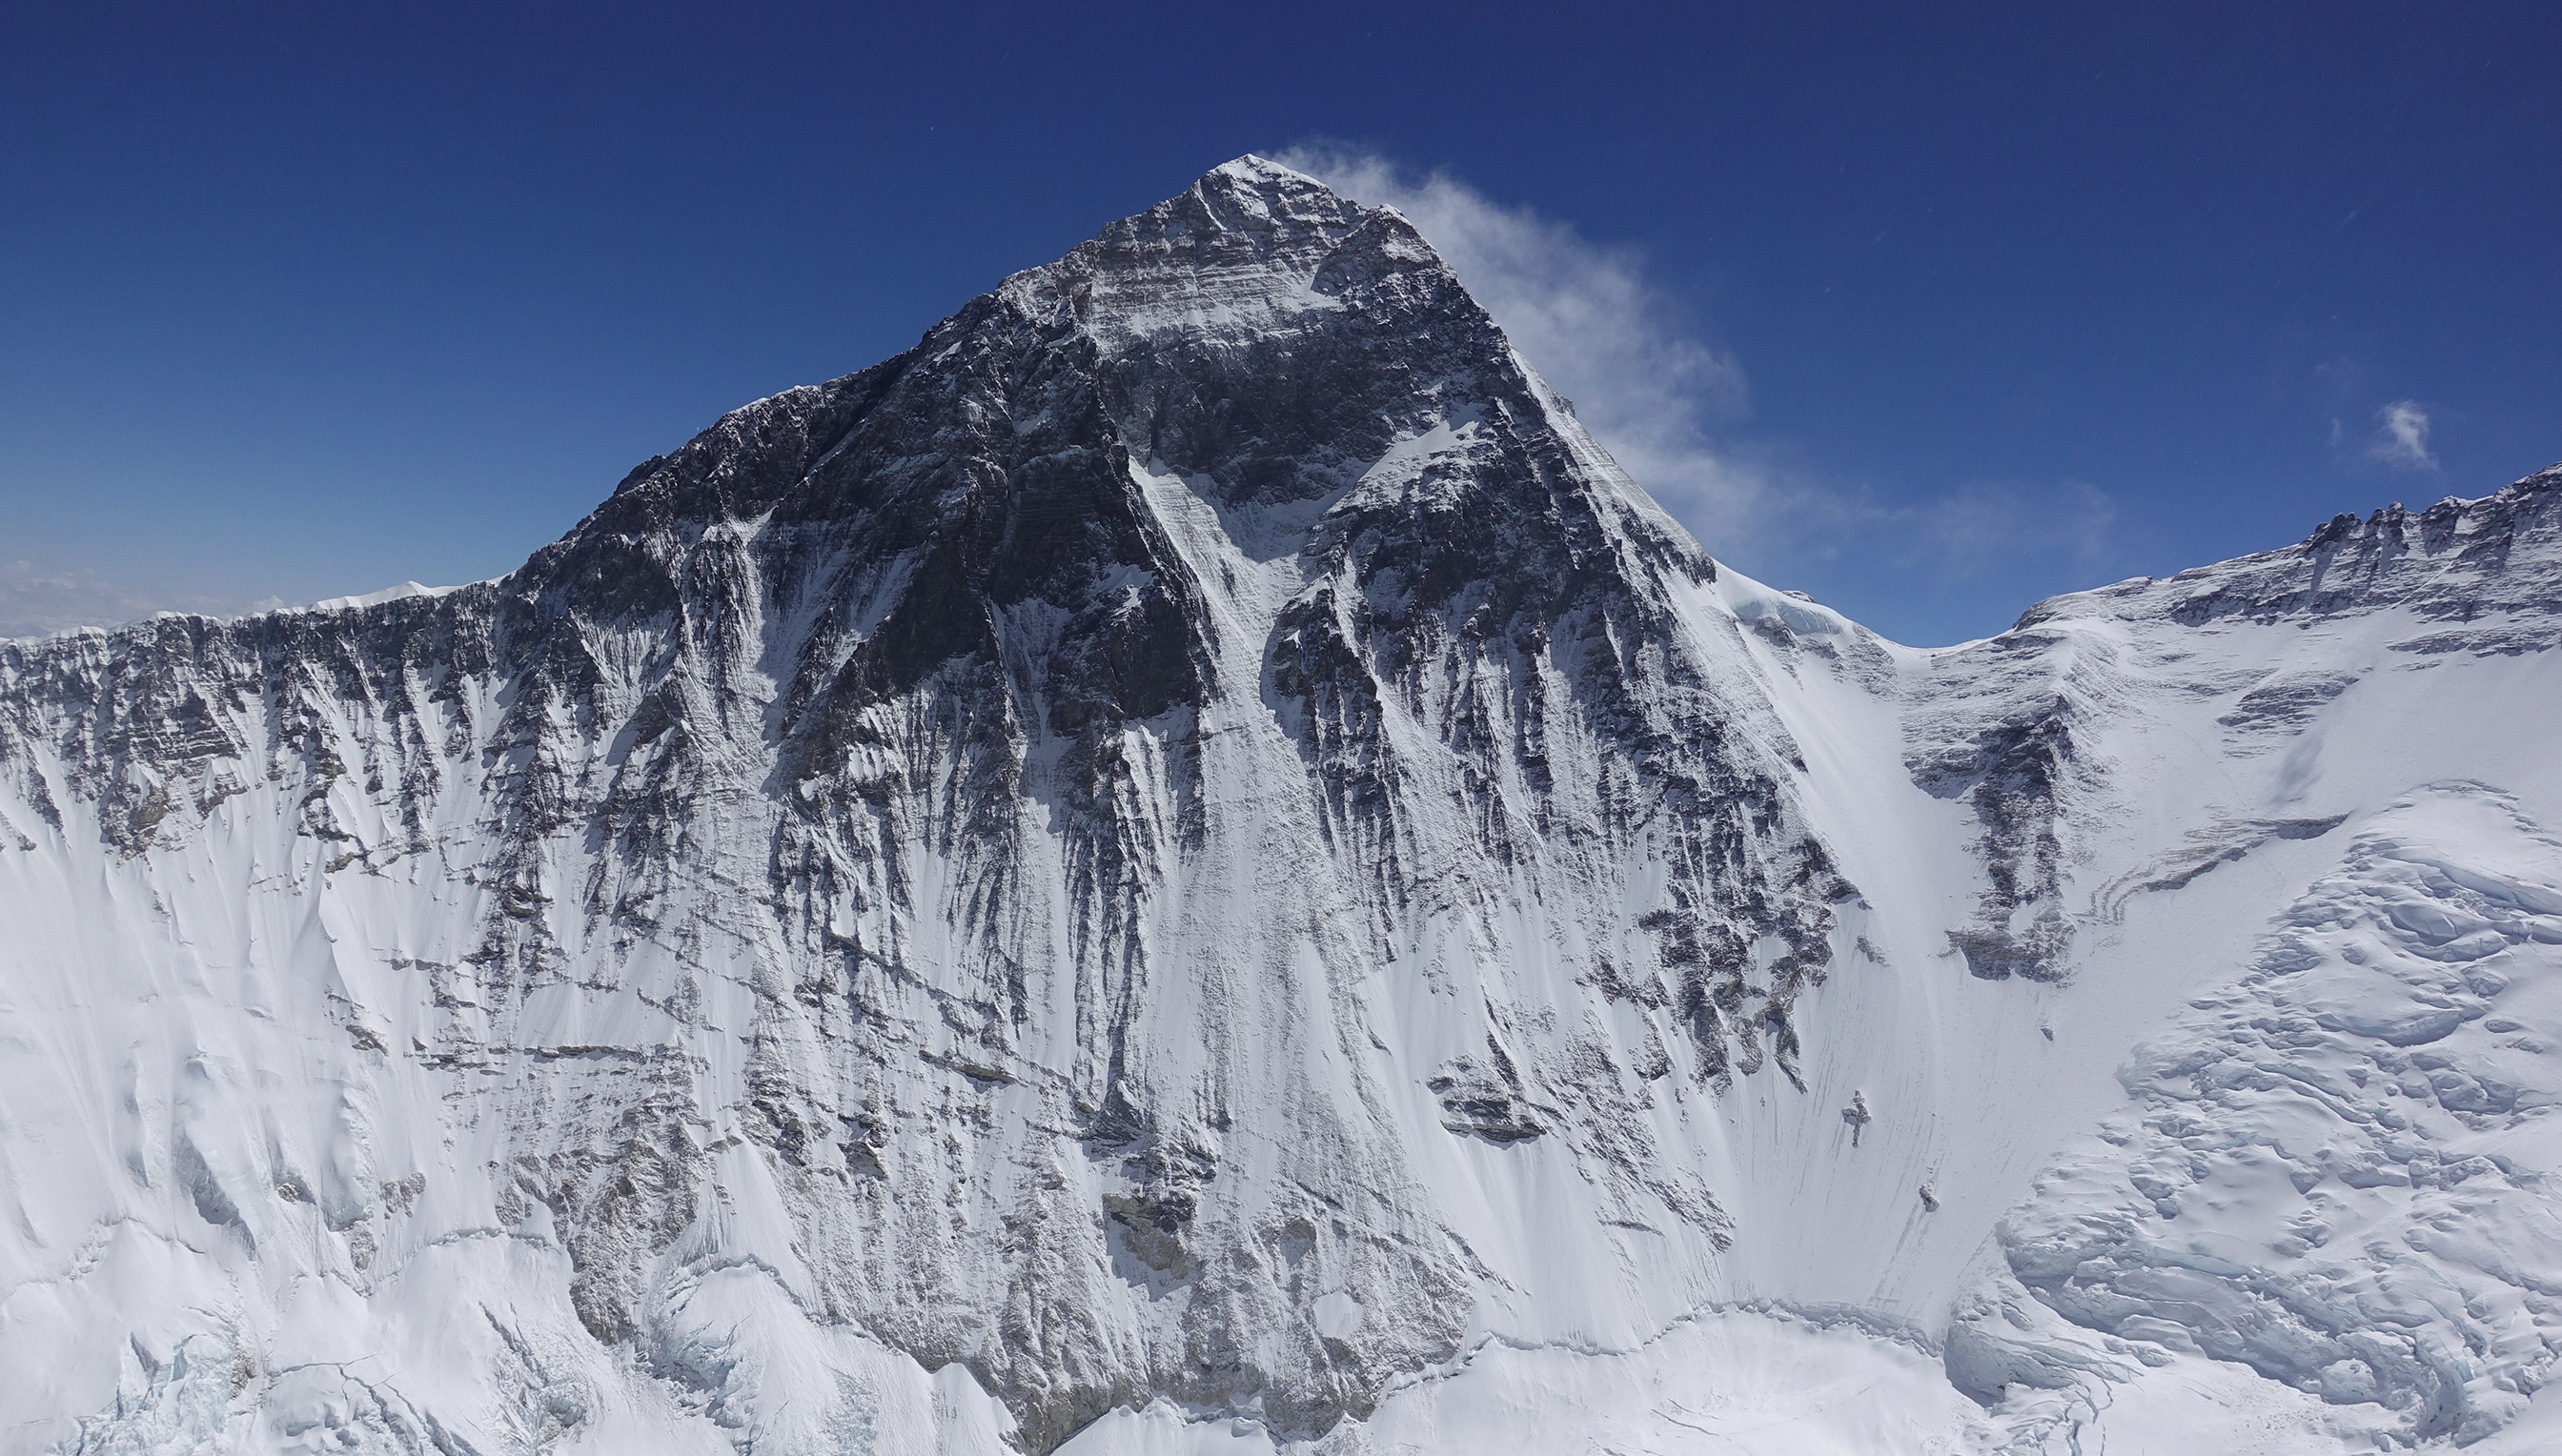 Everest as seen from Nuptse